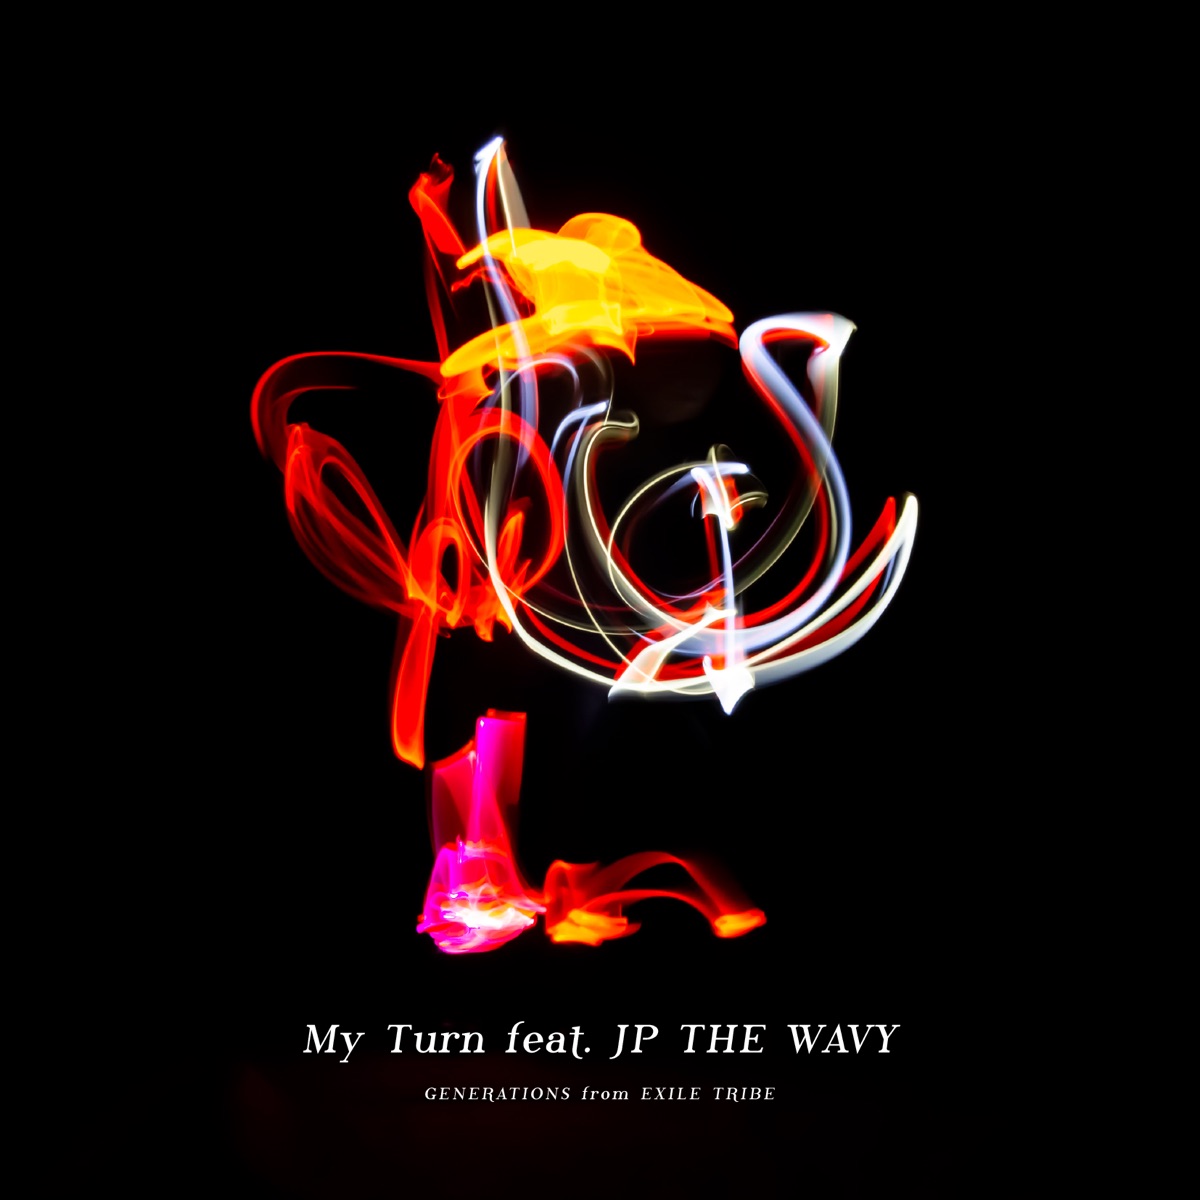 『GENERATIONS - My Turn feat. JP THE WAVY』収録の『My Turn feat. JP THE WAVY』ジャケット